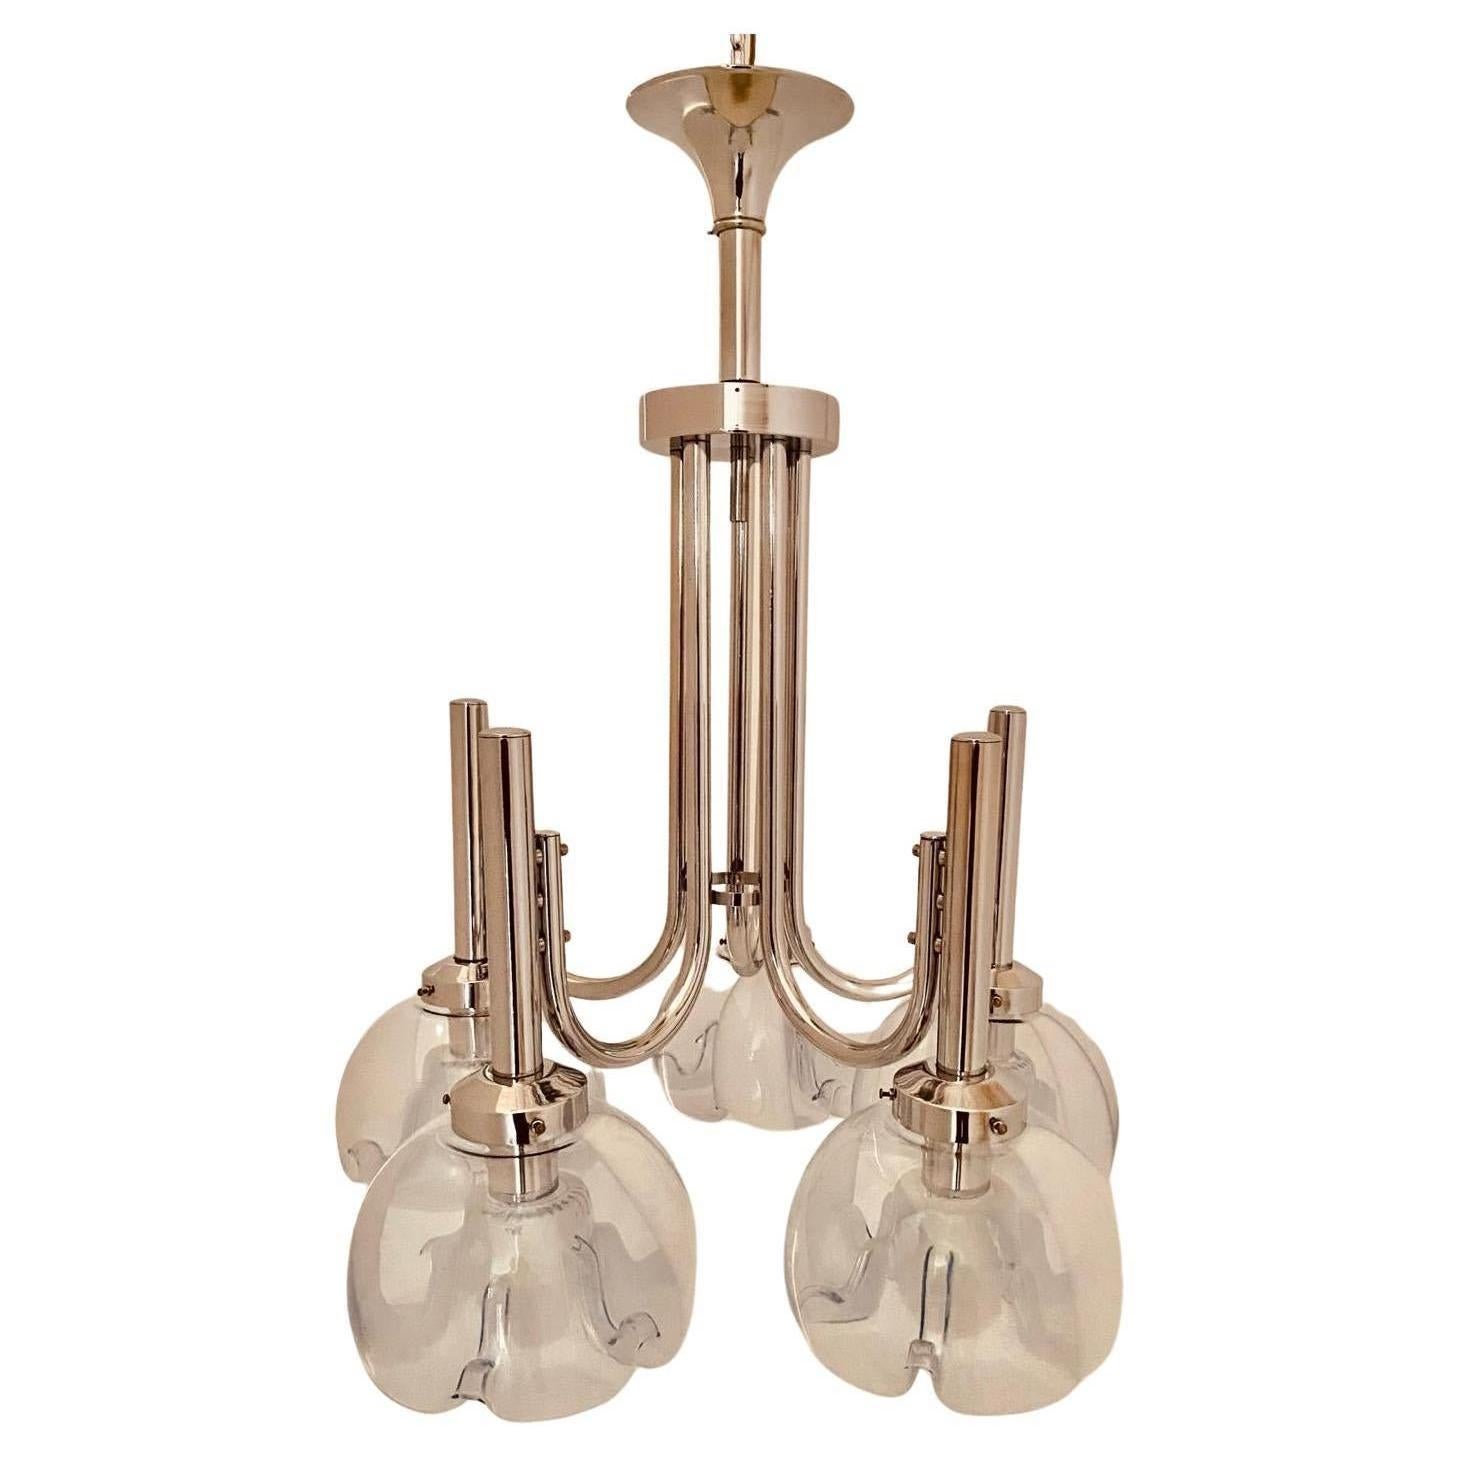 Vintage chromed chandelier from the late 1960s designed and manufactured by Mazzzega, Italy. Distinctive shape reminiscent of the classic Venetian chandelier in a stylized form.

The chandelier consists of a chrome-plated steel frame with five light